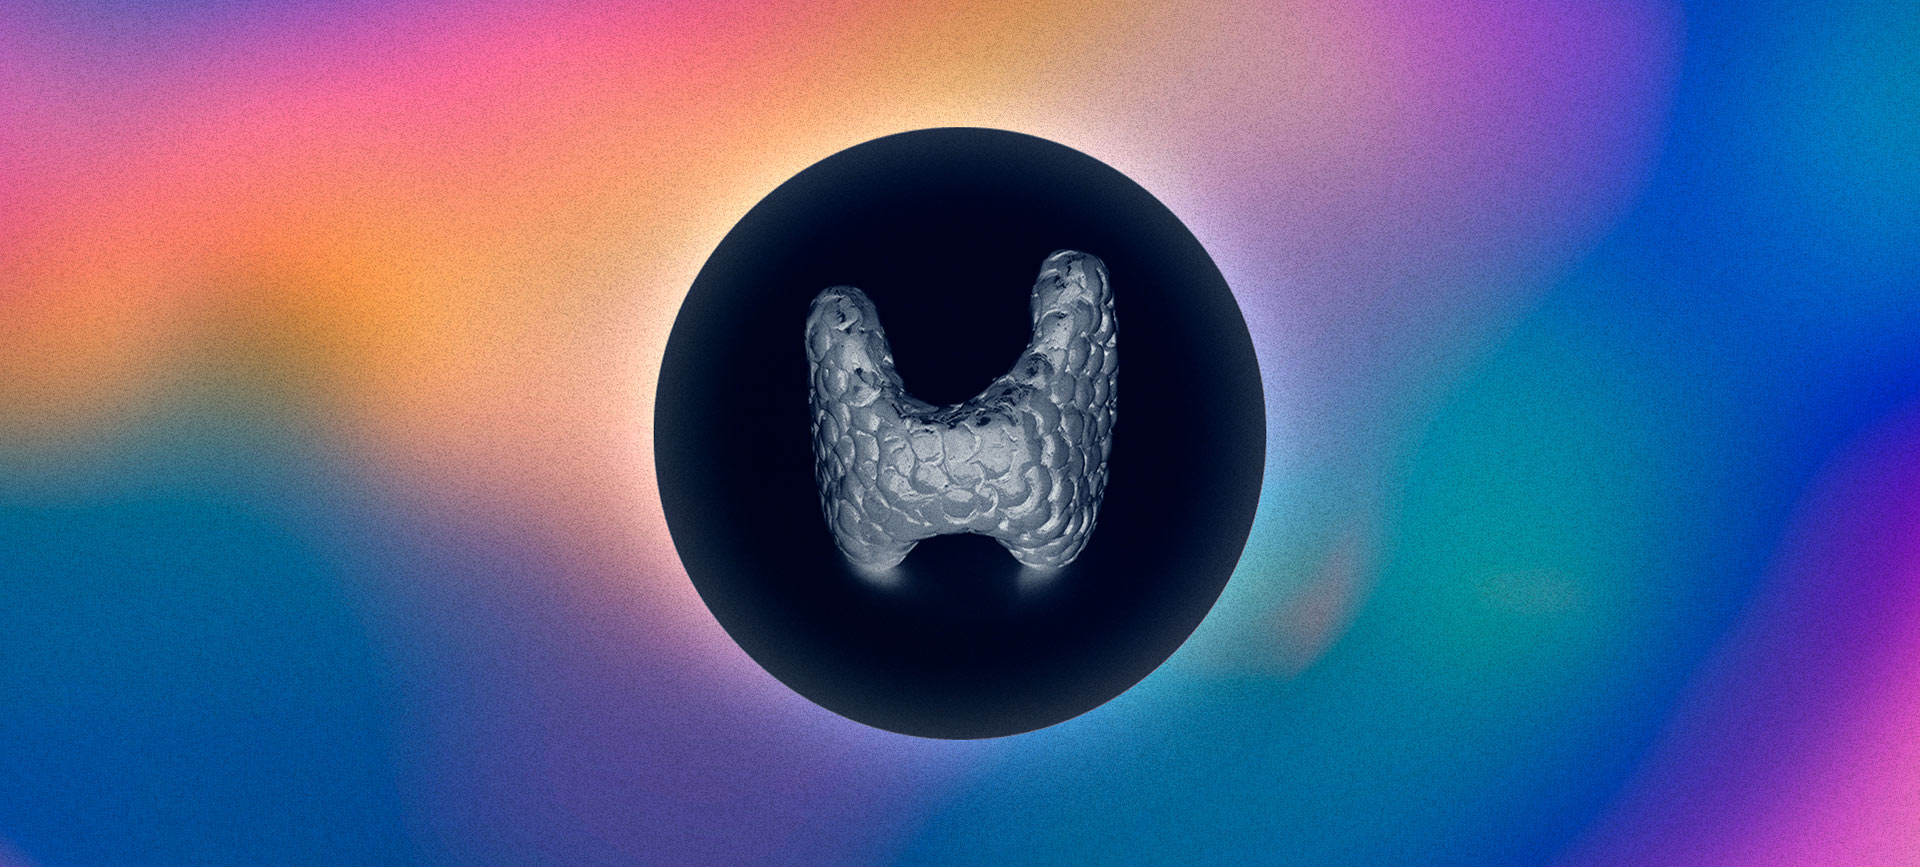 A grey thyroid is in the middle of a black circle against a multicolored background.